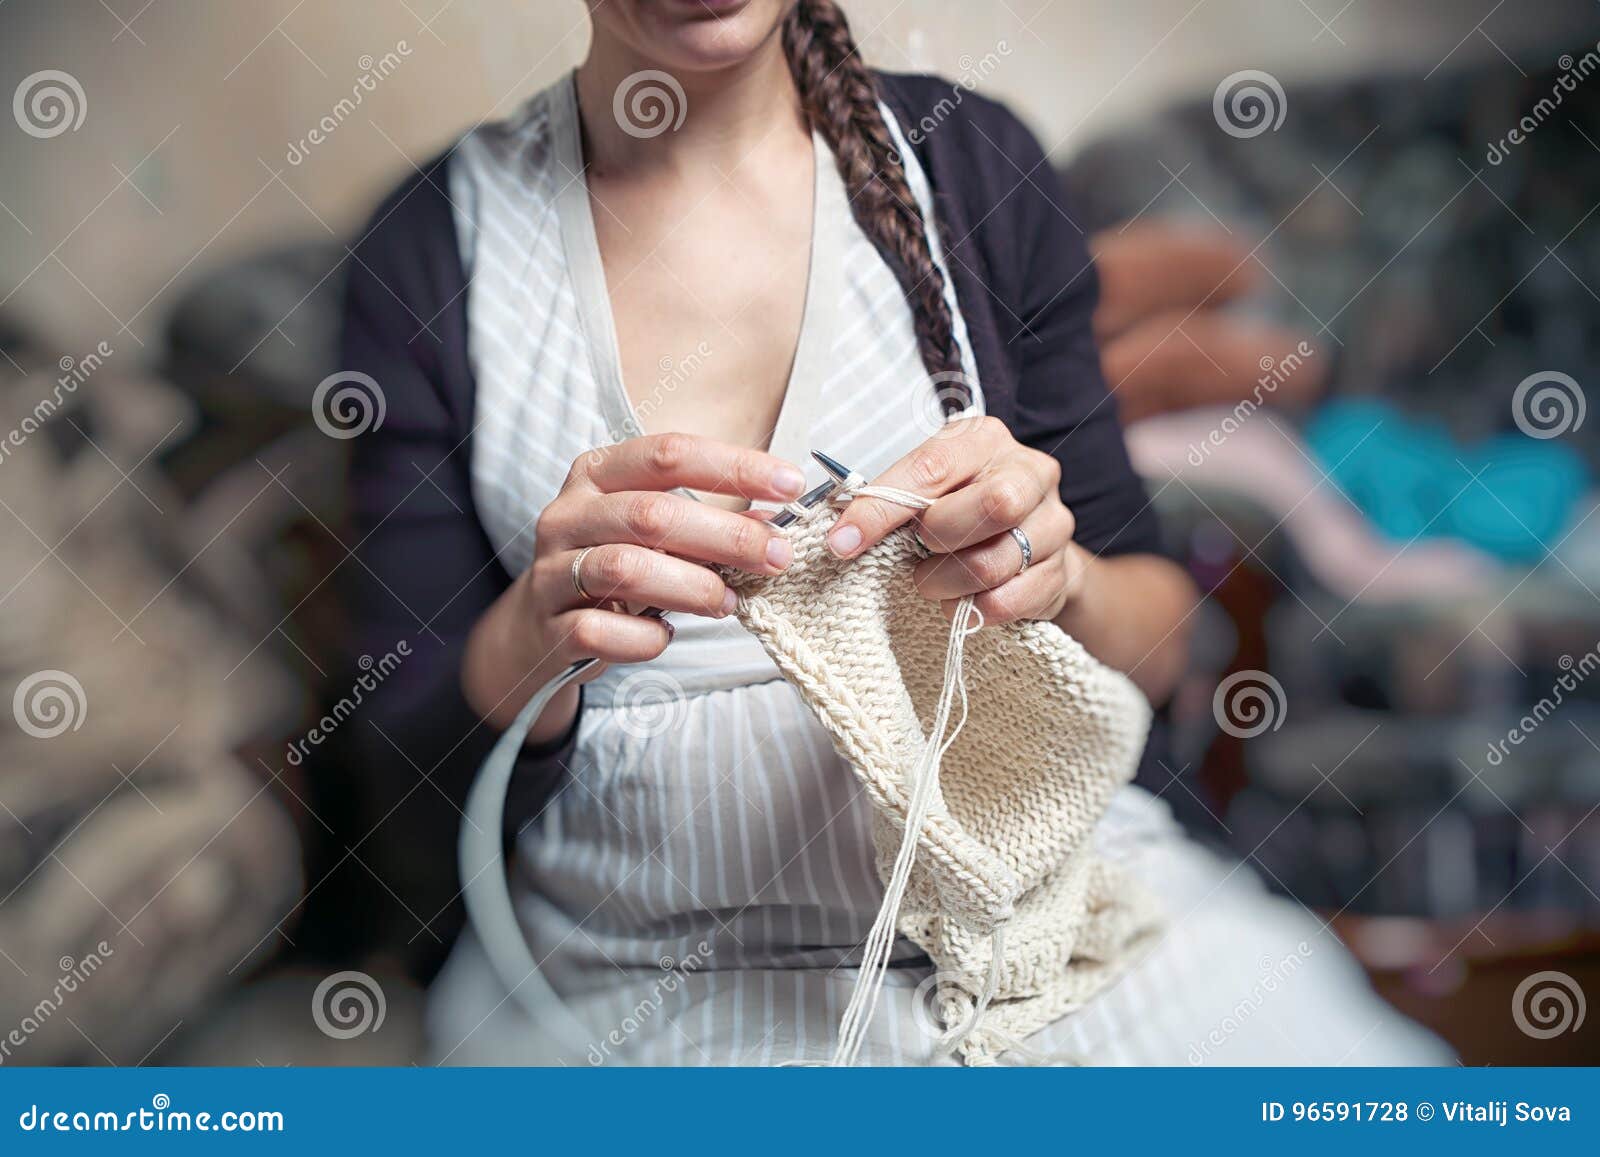 young woman knits